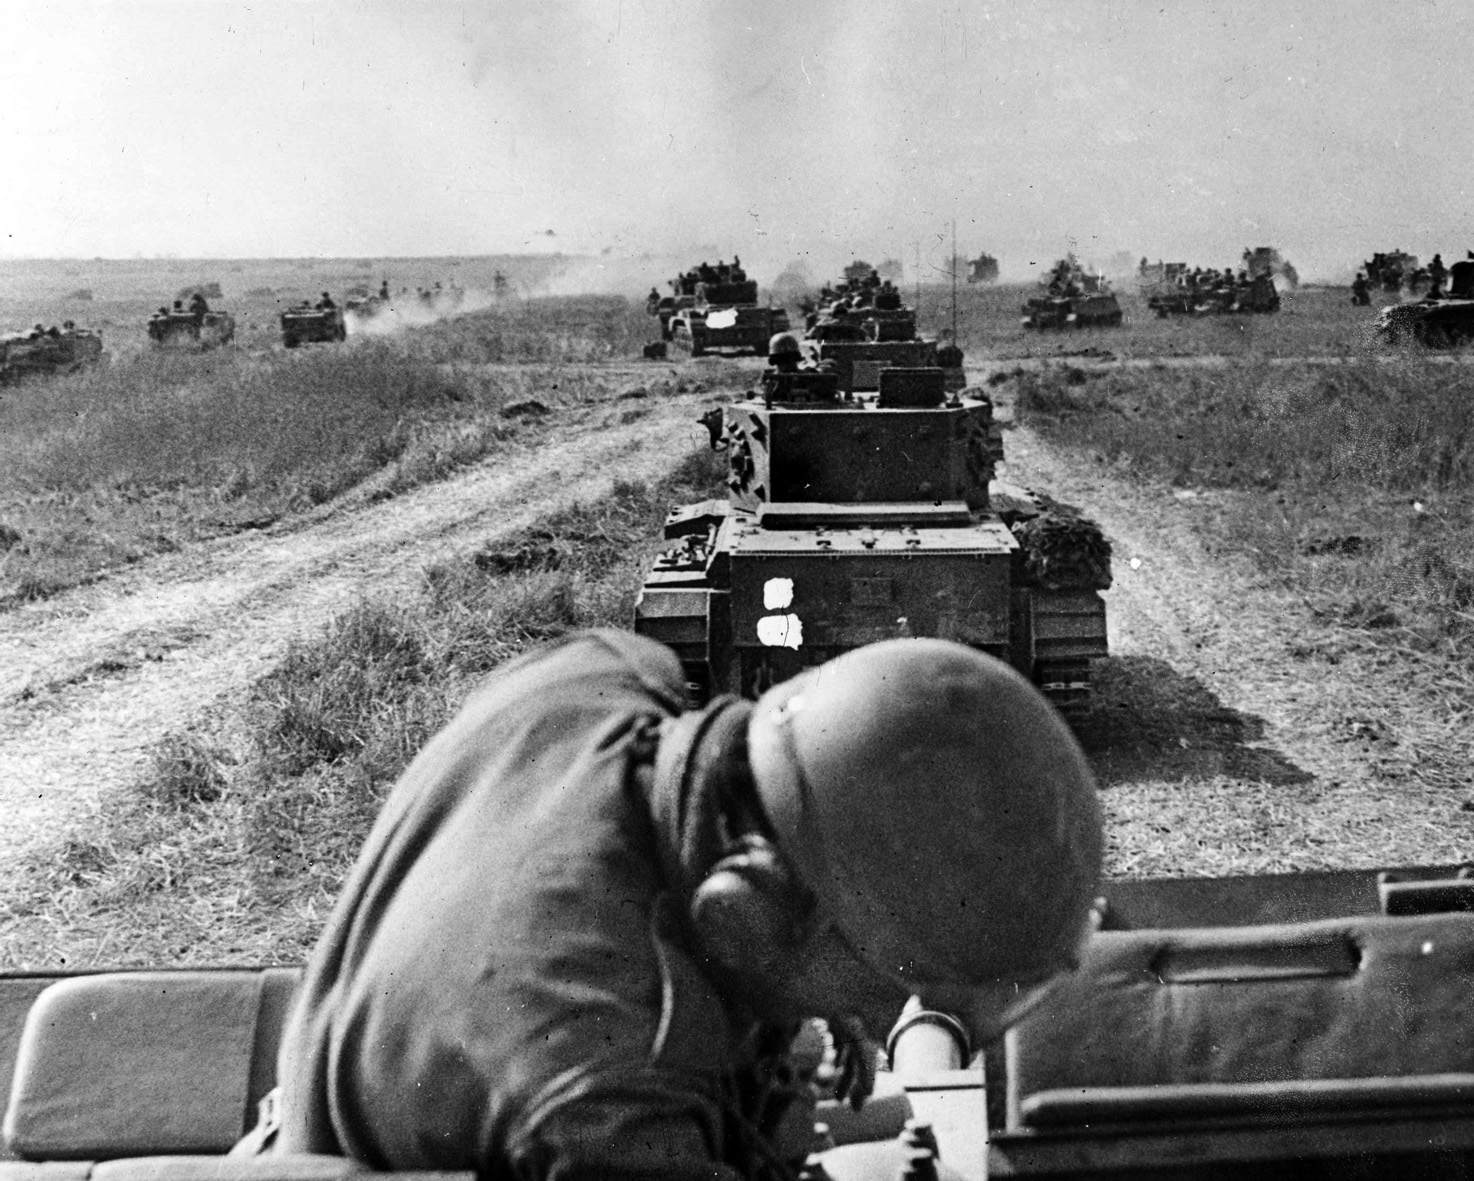 British armored forces advance against Hill 112 near Caen. A vicious battle with the 12th SS Panzer Division “Hitlerjugend” followed, and eventually Allied forces defeated the fanatical Nazi resistance. 